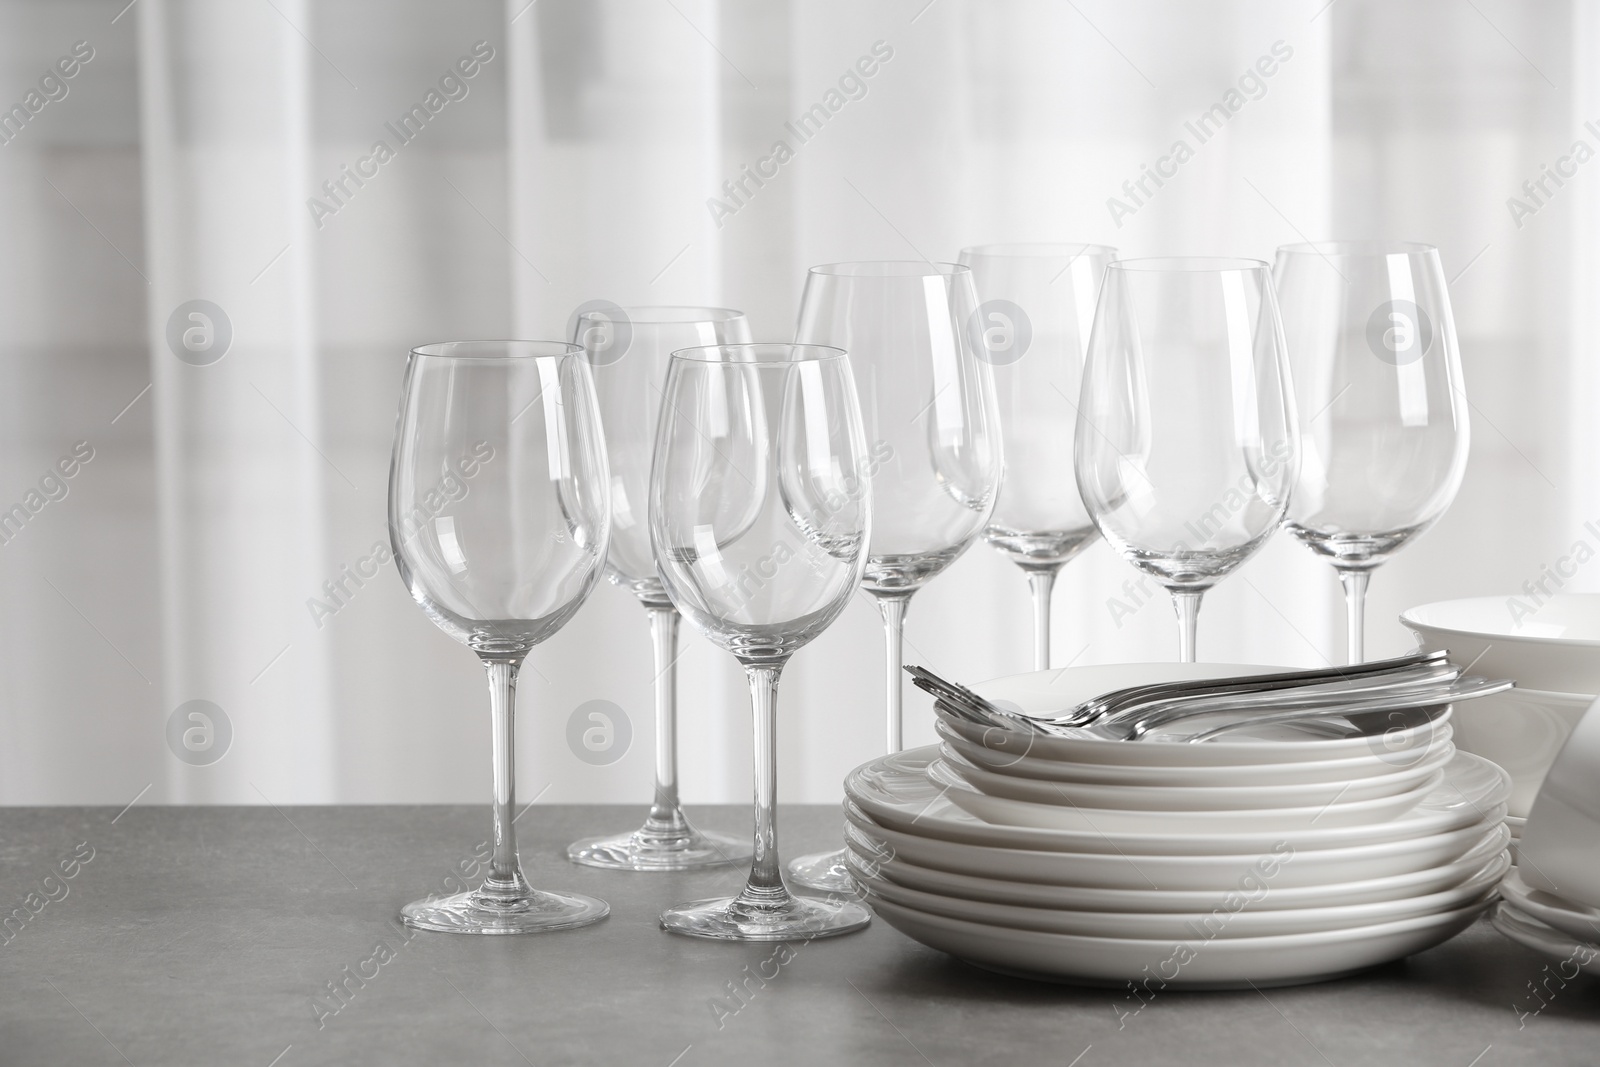 Photo of Set of clean dishes on the table against blurred background